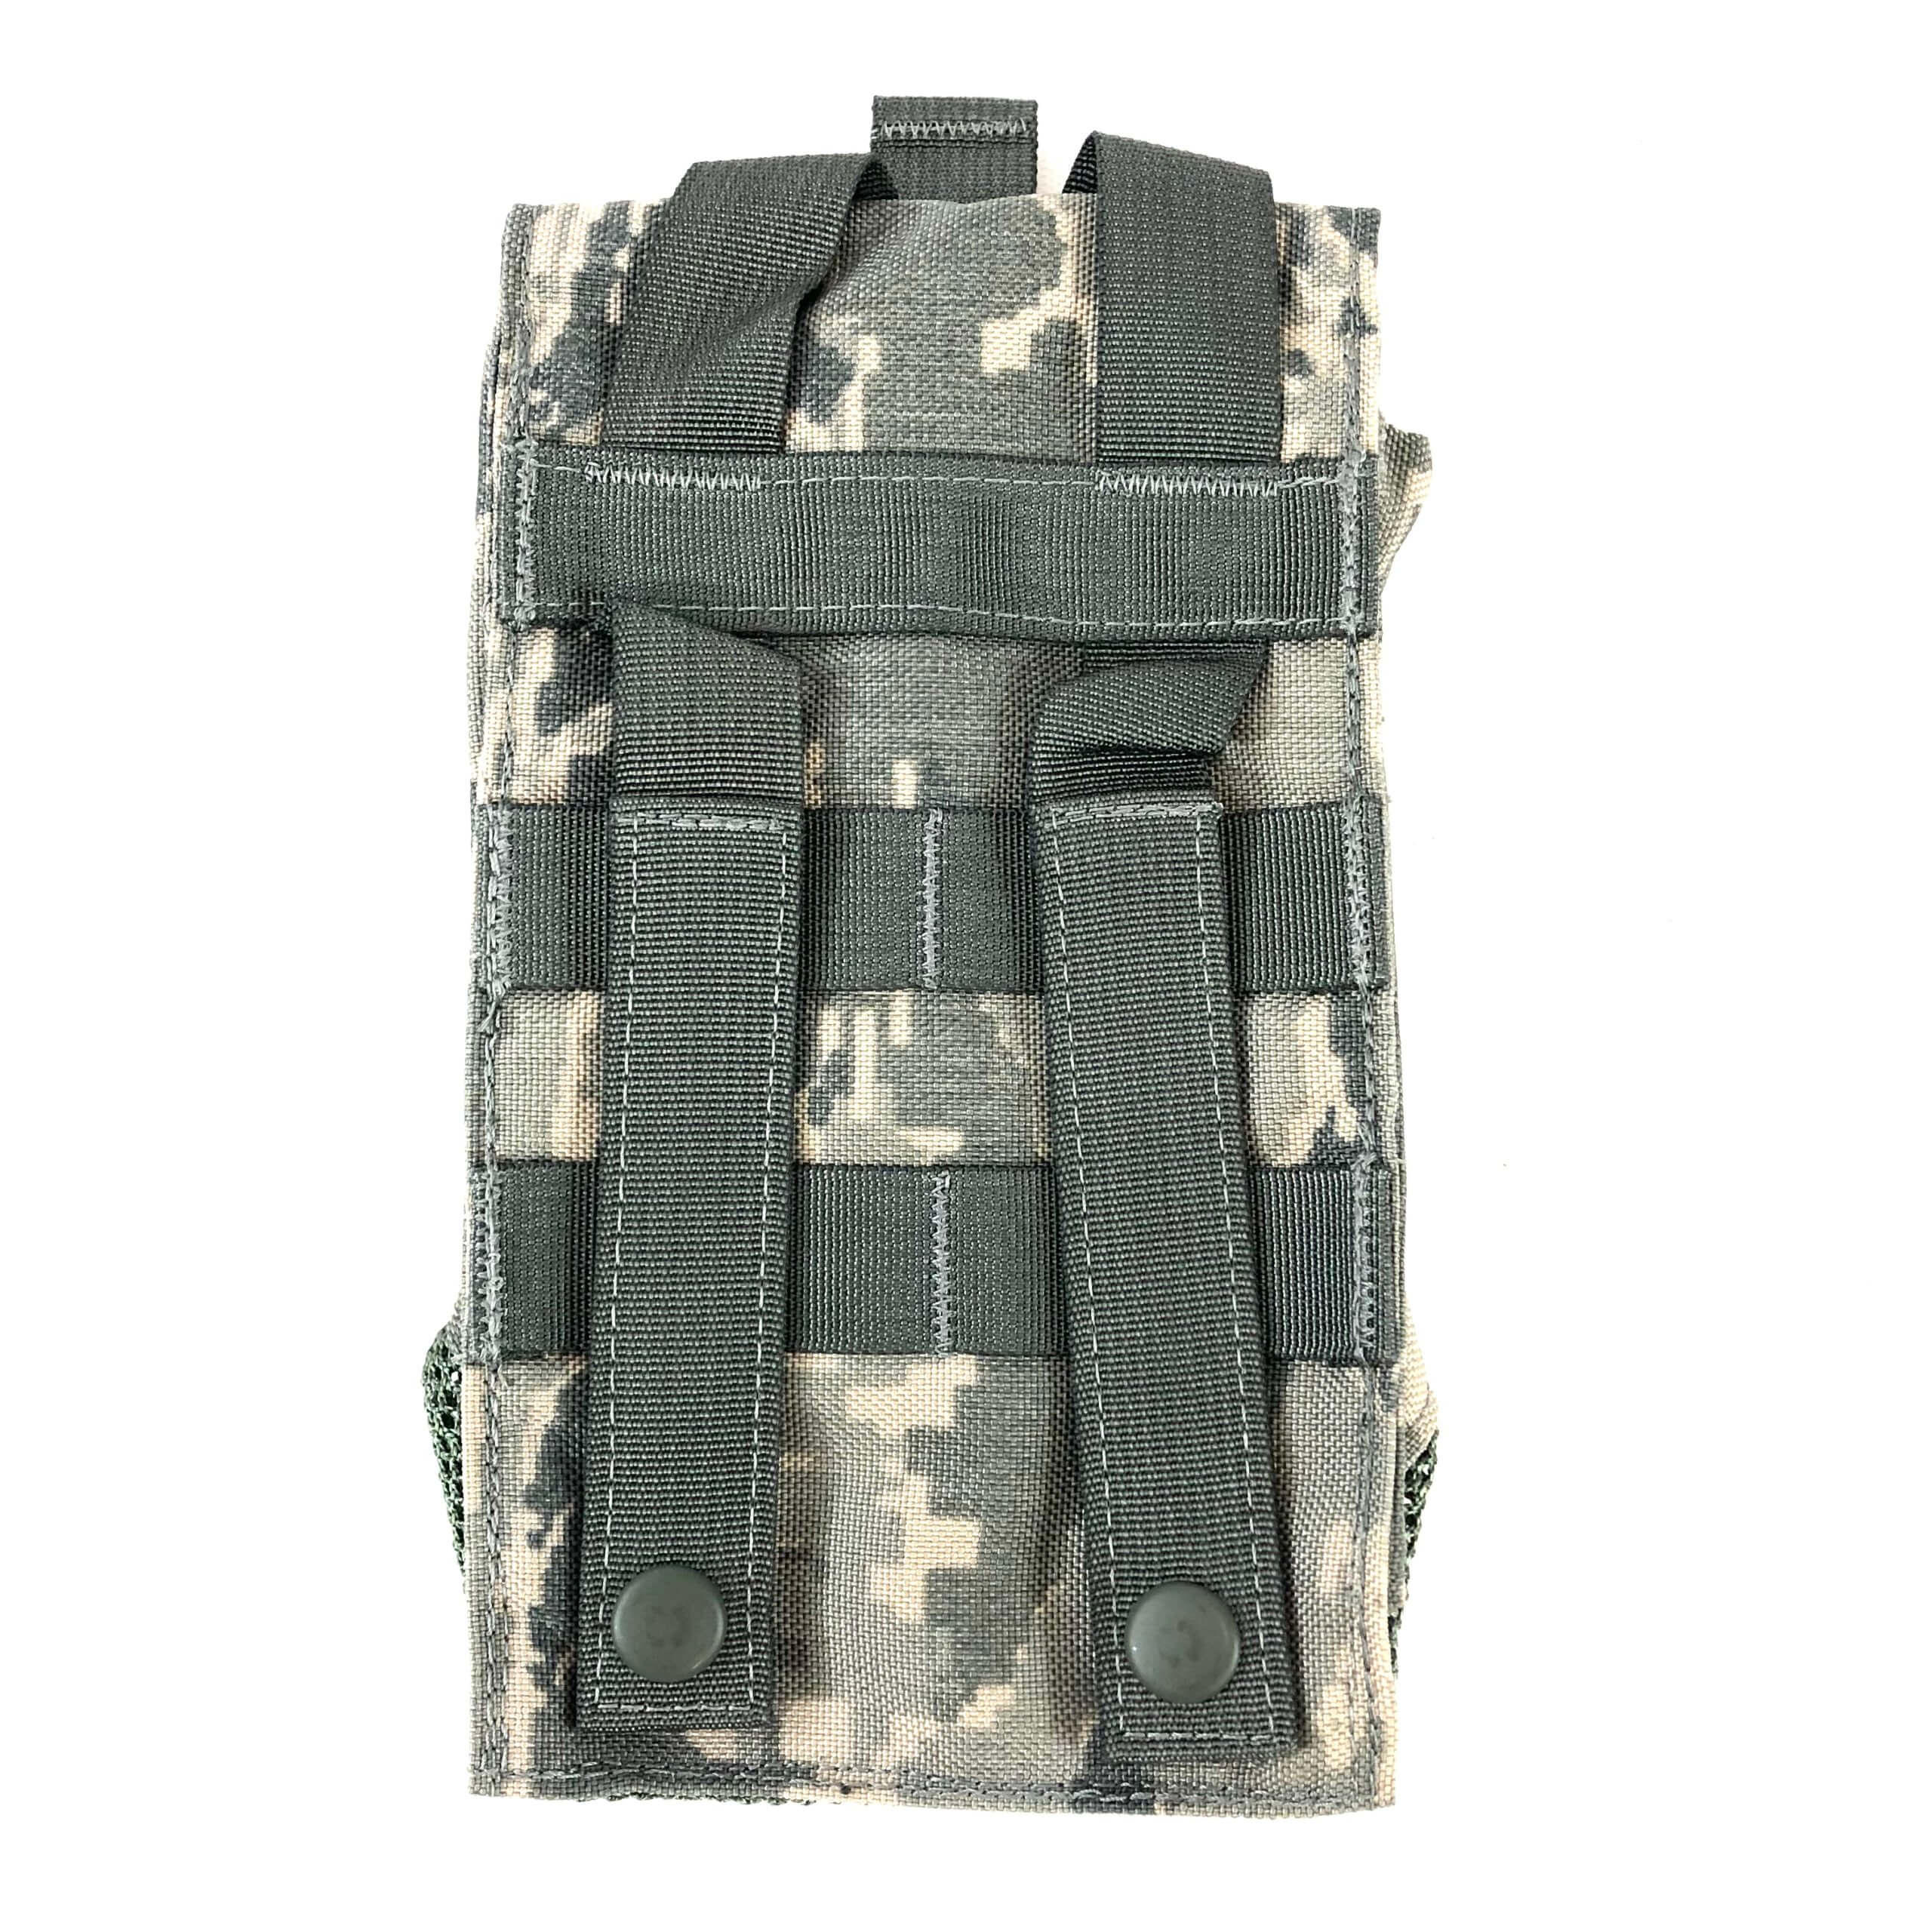 Details about   USAF US Air Force ABU Combat Carry Utility Belt Pouch Multi Purpose 3" x 5" 9-U 